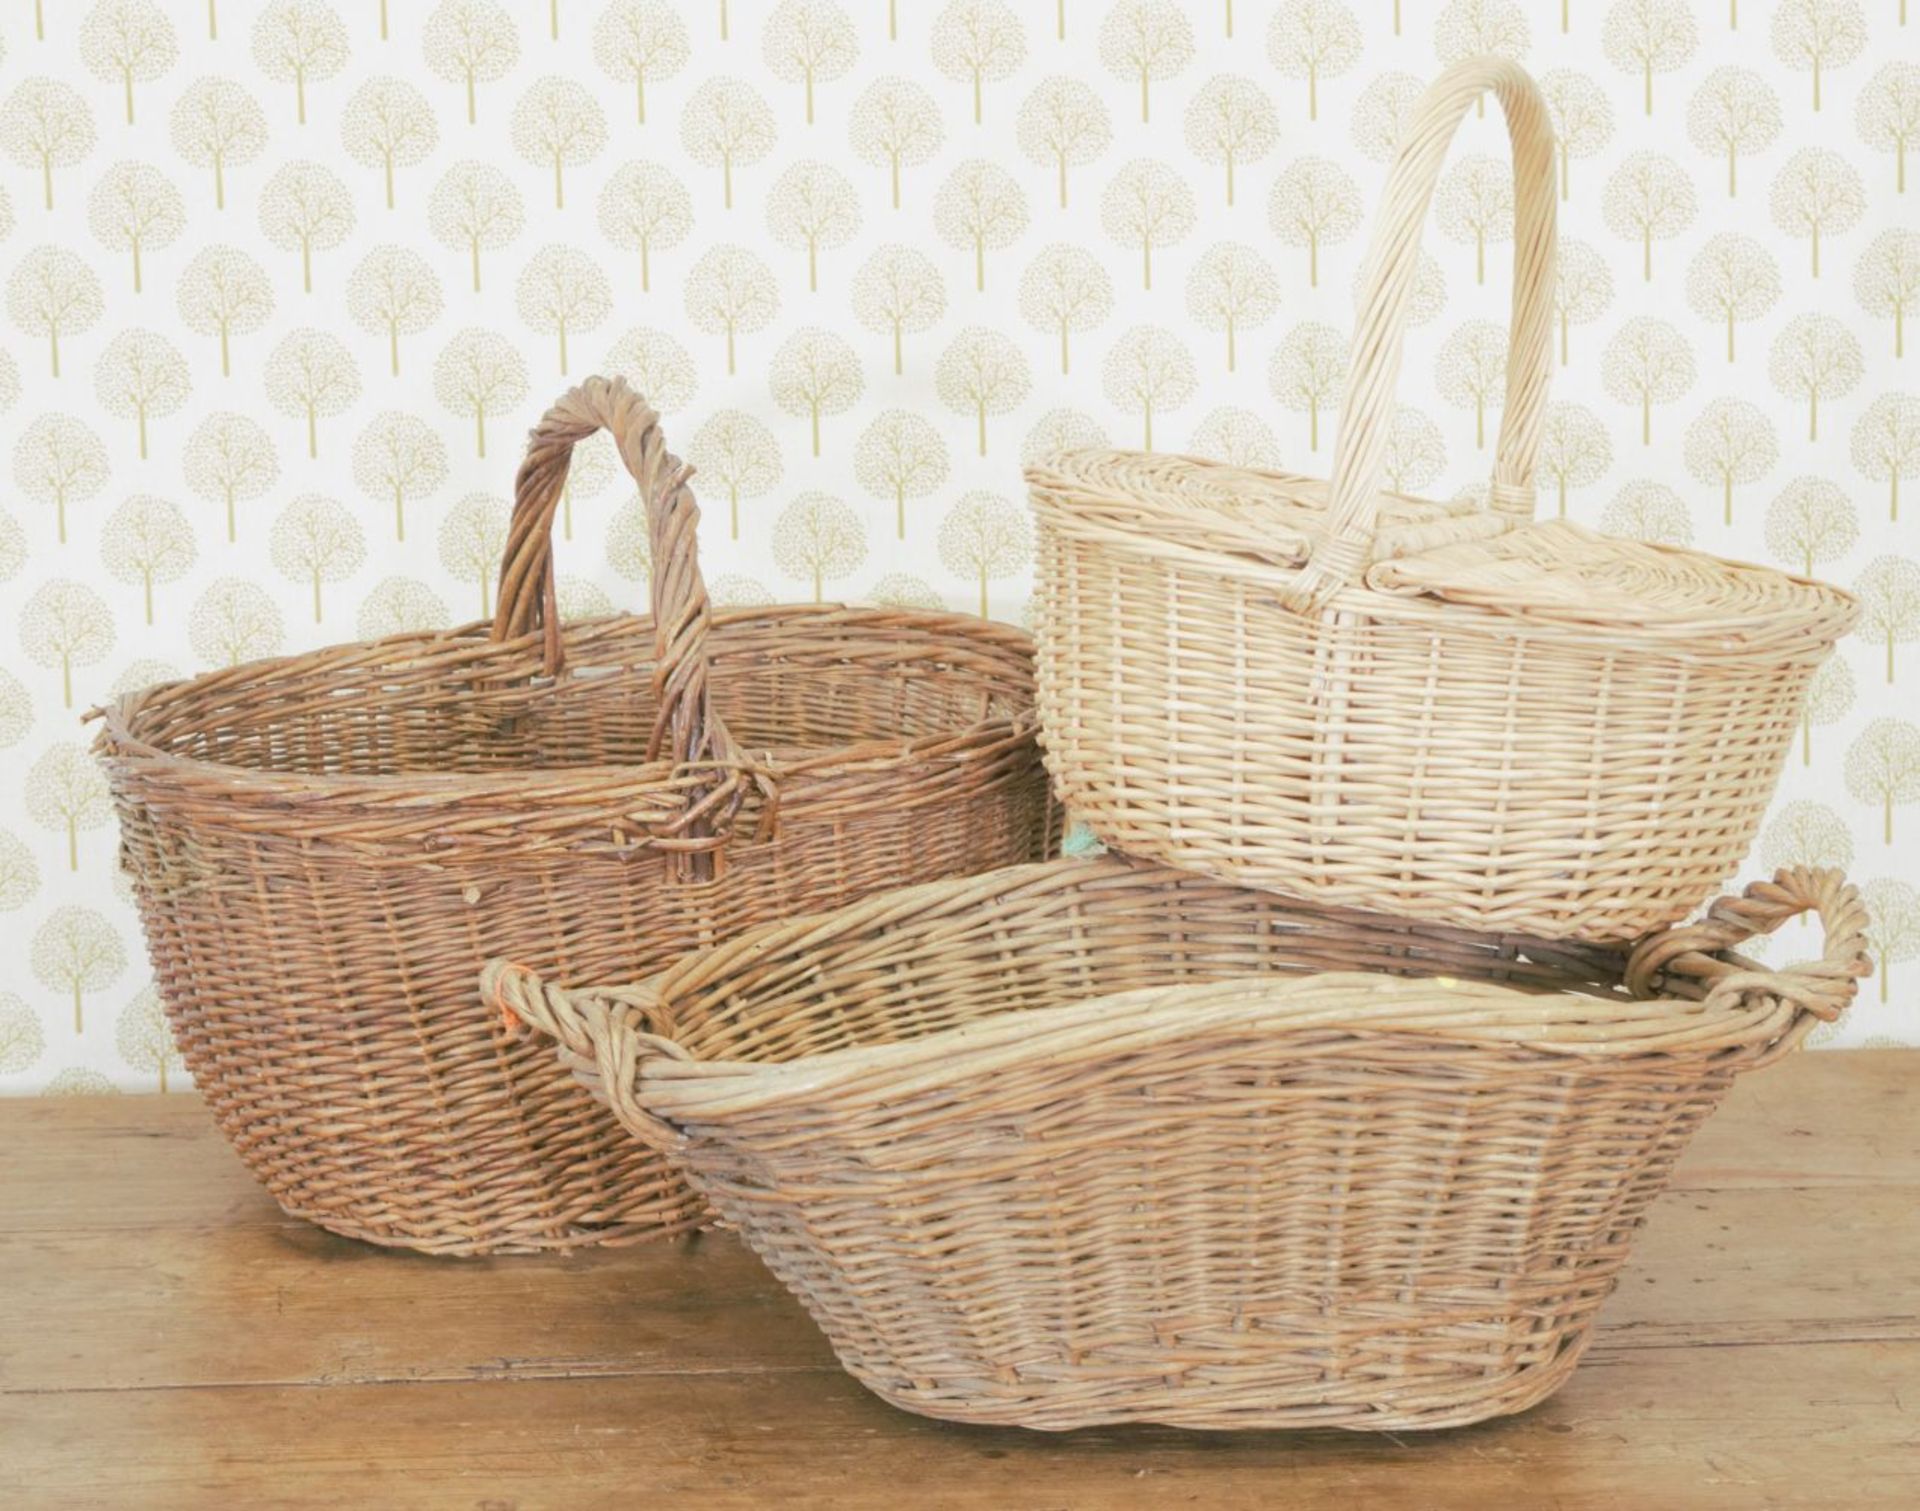 COLLECTION OF 3 WICKER SHOPPING BASKETS